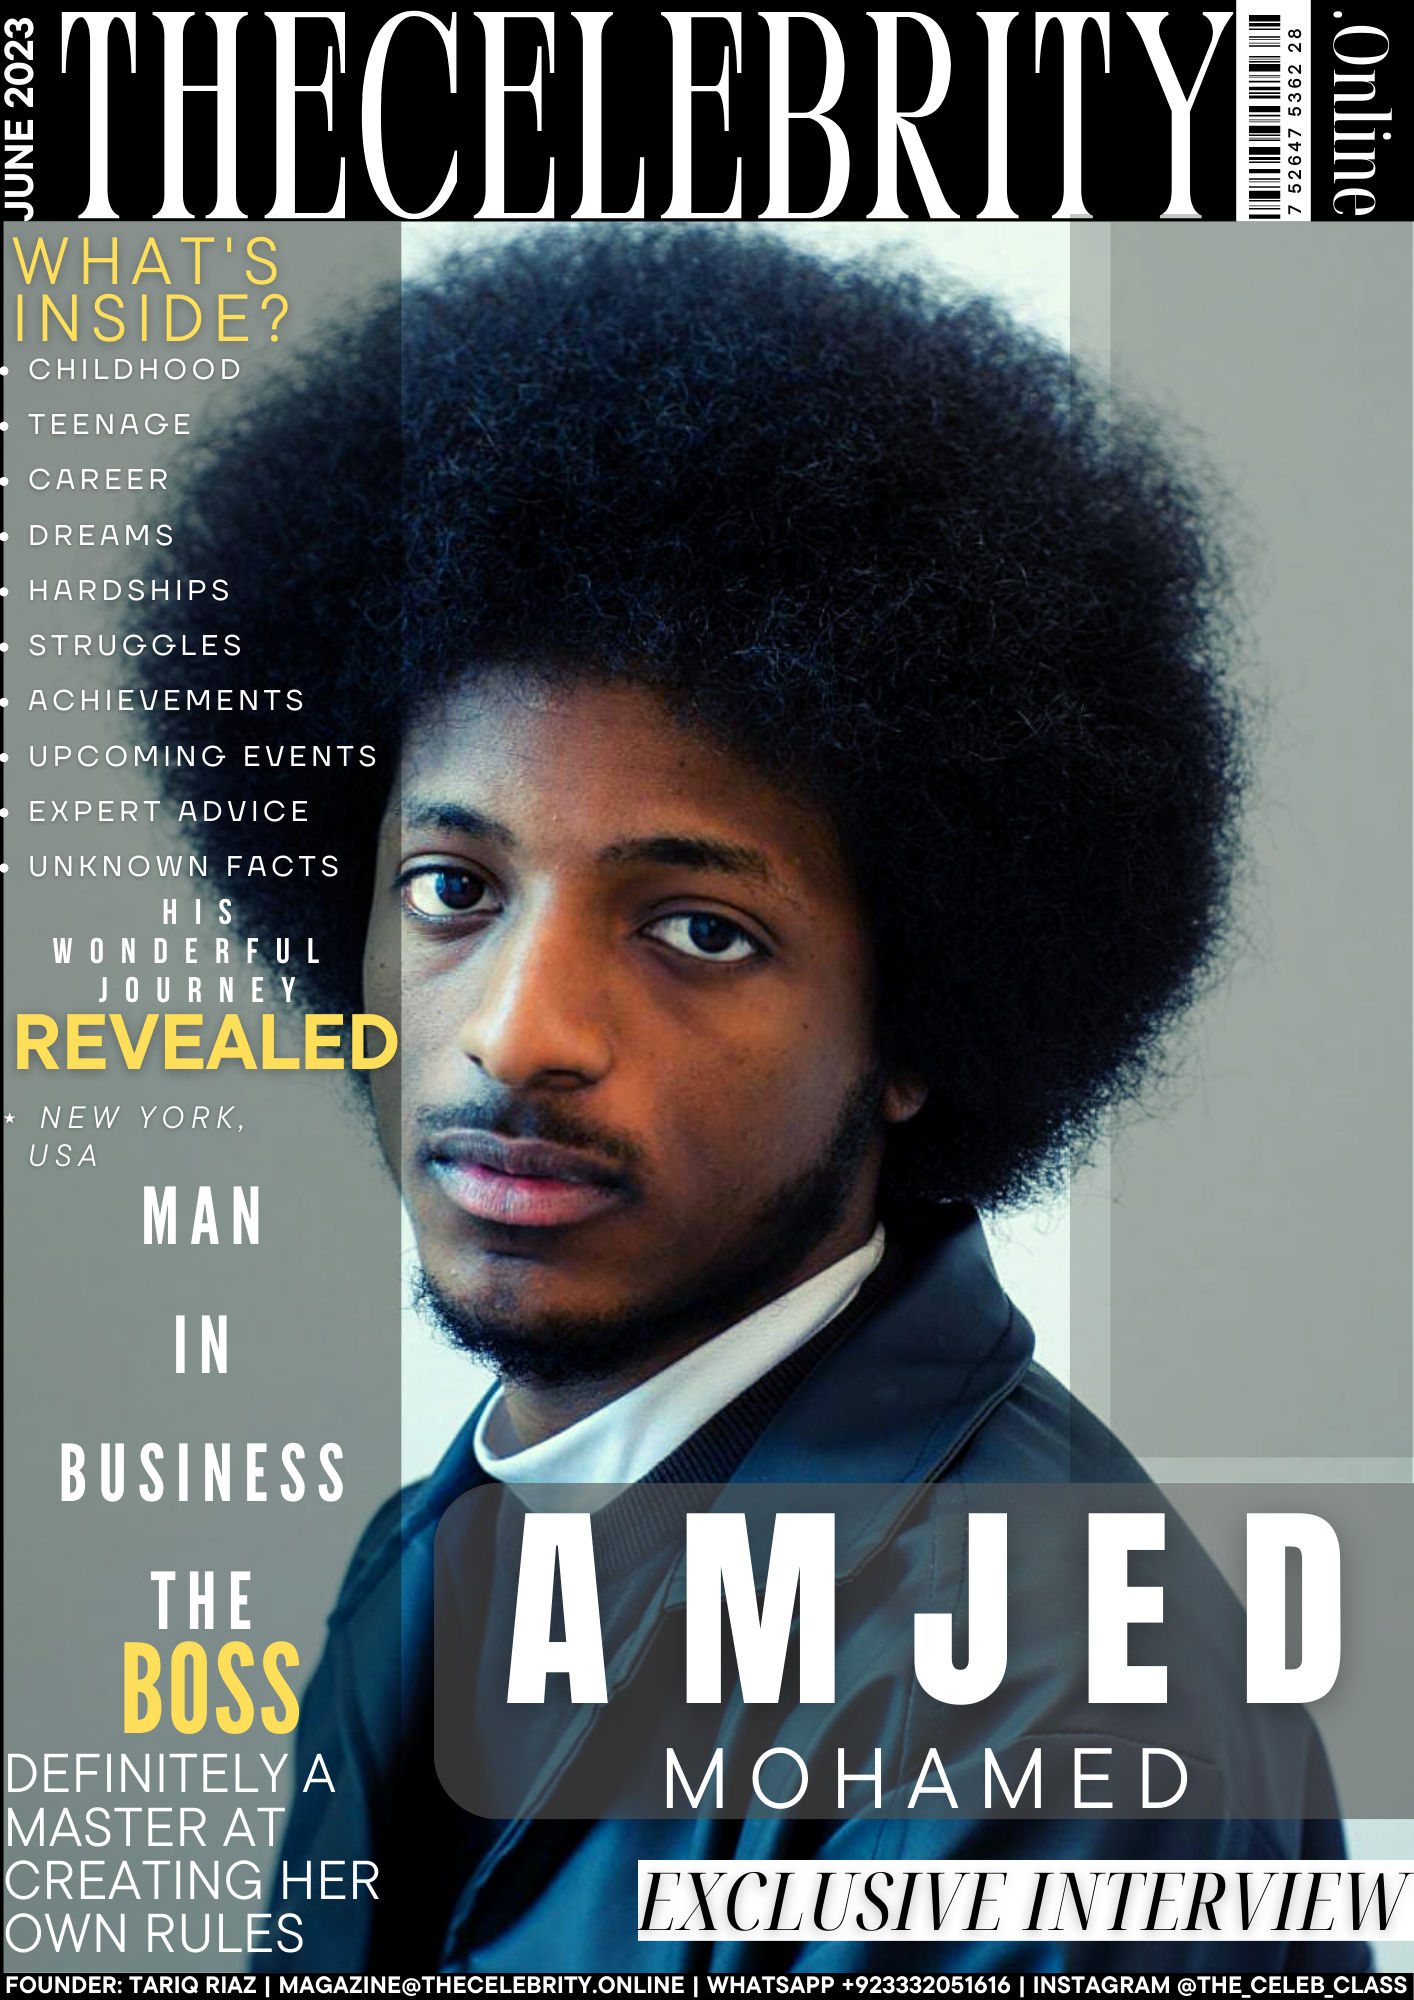 Amjed Mohamed Exclusive Interview – ‘Focus On Yourself And Look At Other’s Journey’